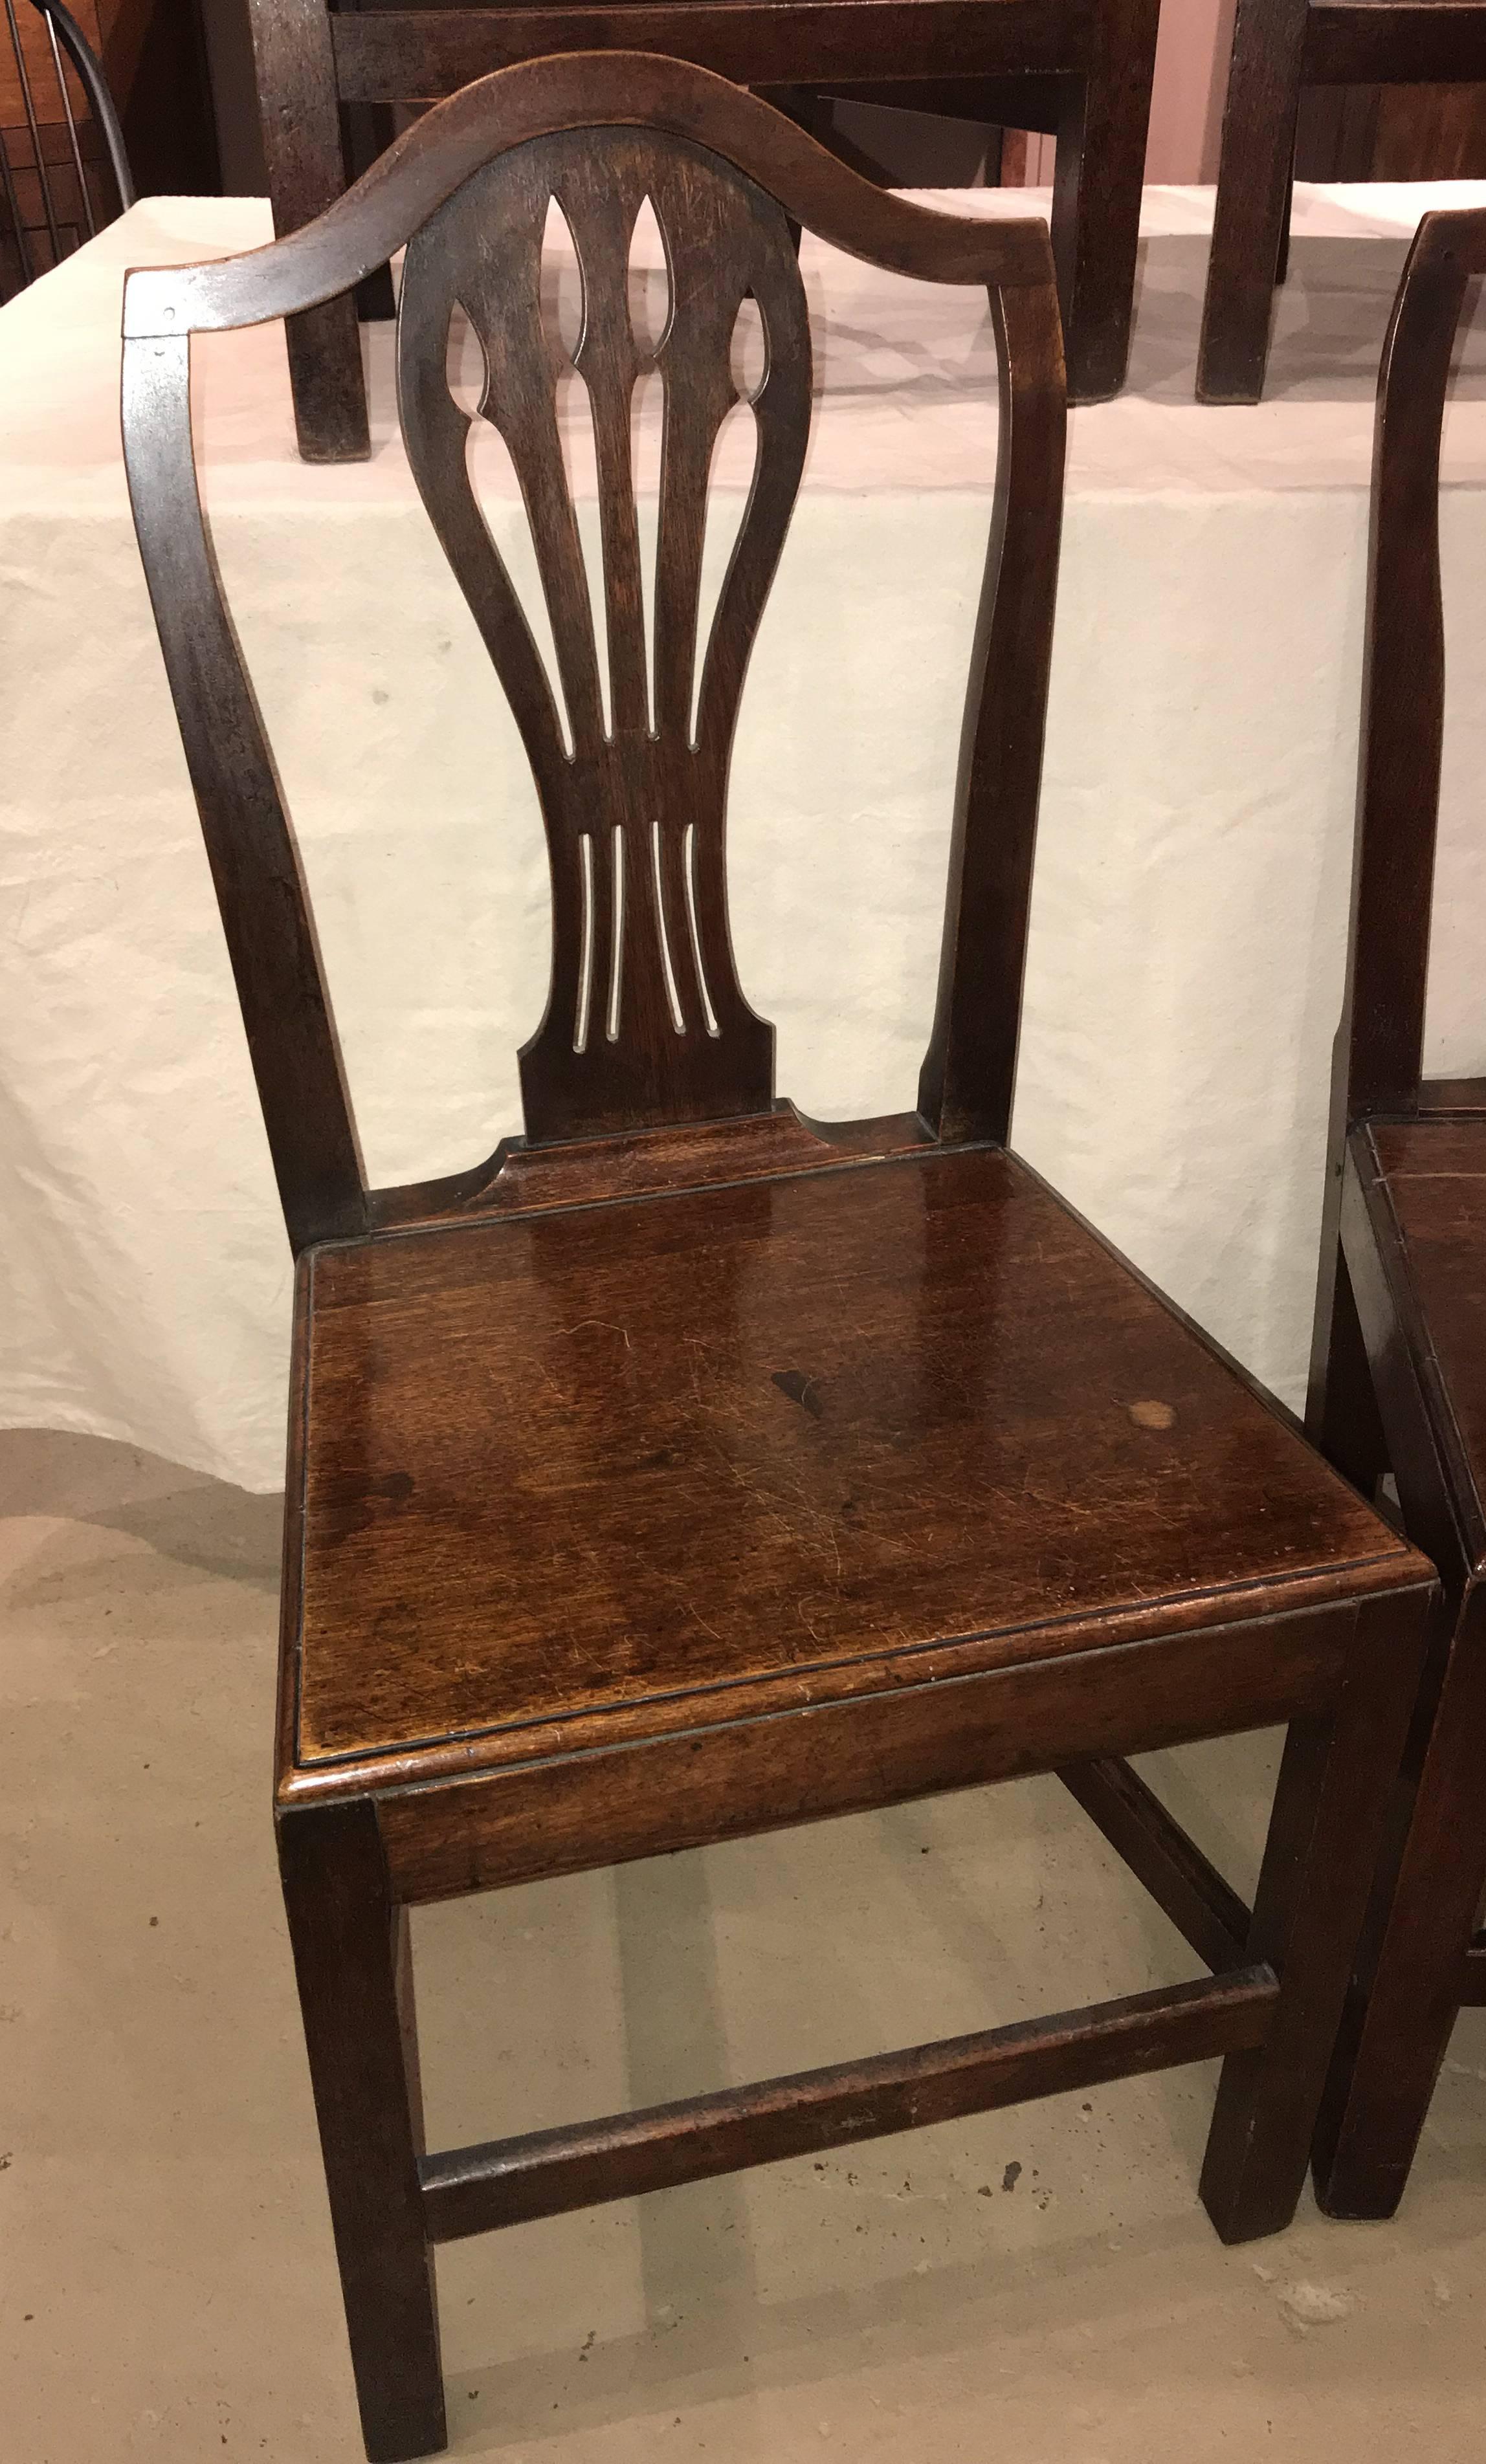 A solid set of six English Georgian oak dining chairs with shaped top rail, flat pierced back splat, simple plank or board seat raised on square legs, with great color. The set probably dates to the late Georgian period (early 19th century) and is